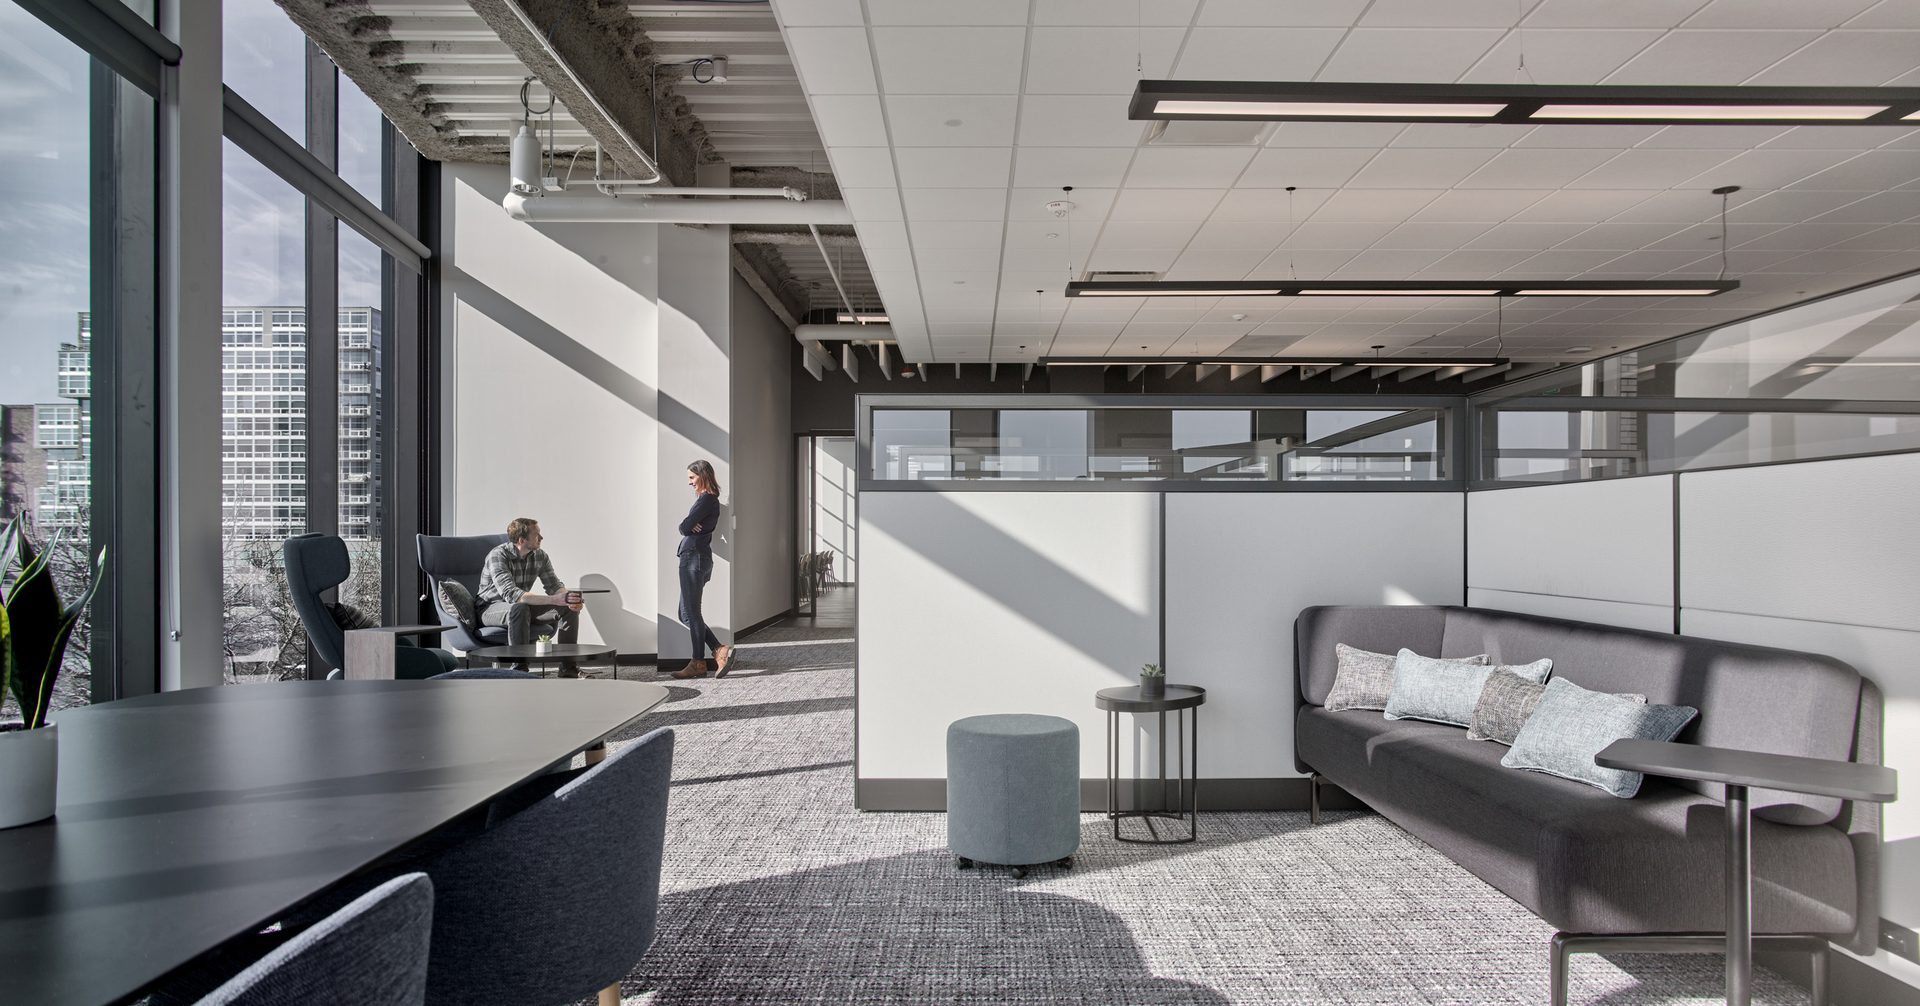 WHEDA Offices Showcase a Modern Industrial Aesthetic with Ceiling Systems